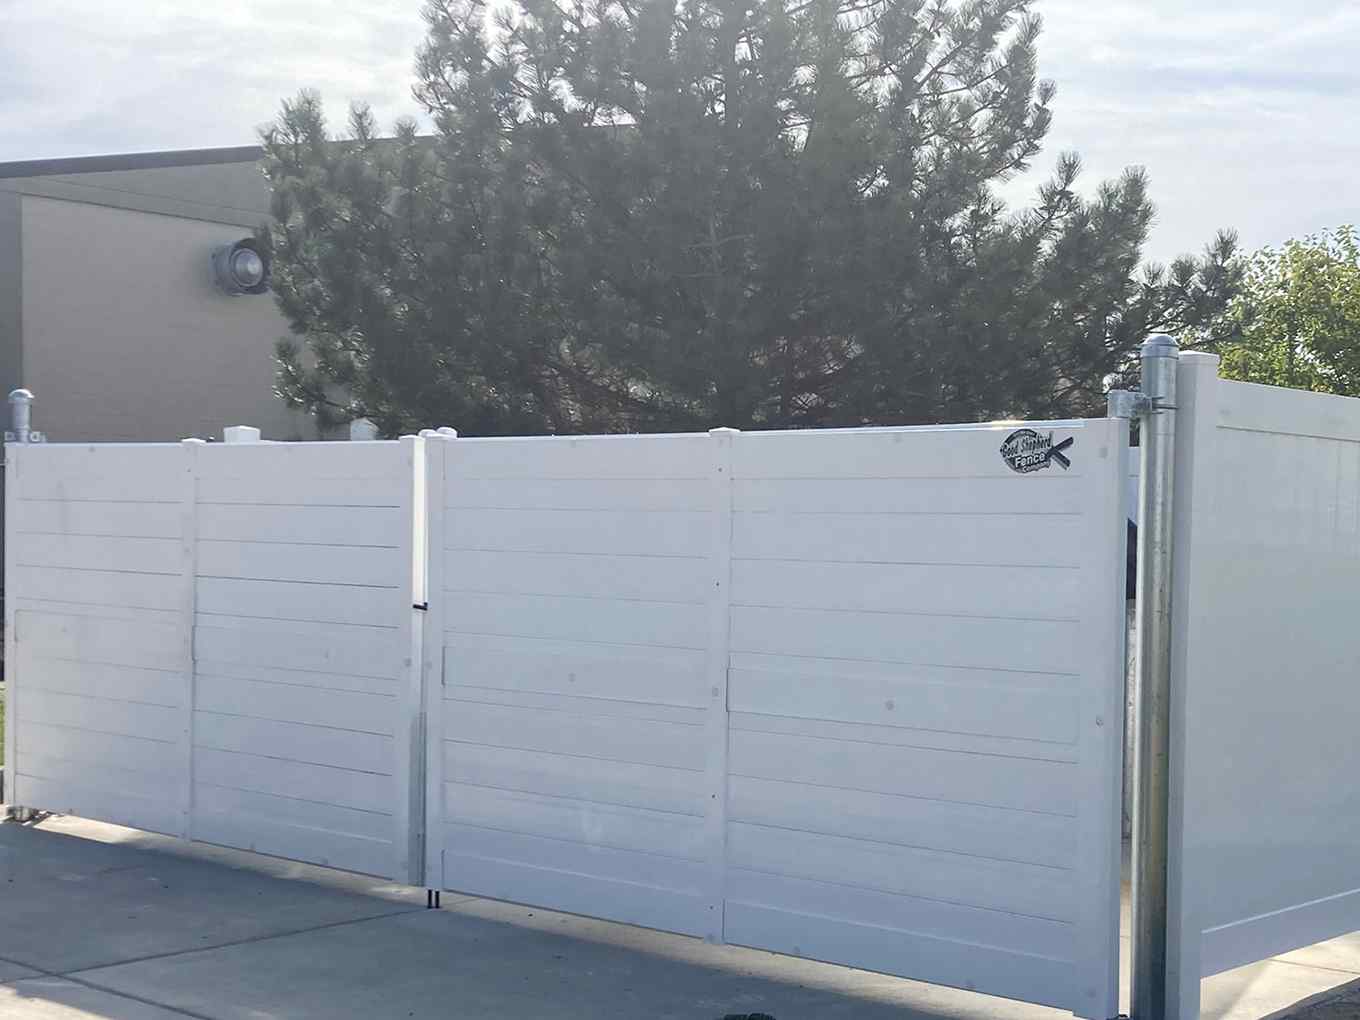 Commercial vinyl fence in Indianapolis, Indiana